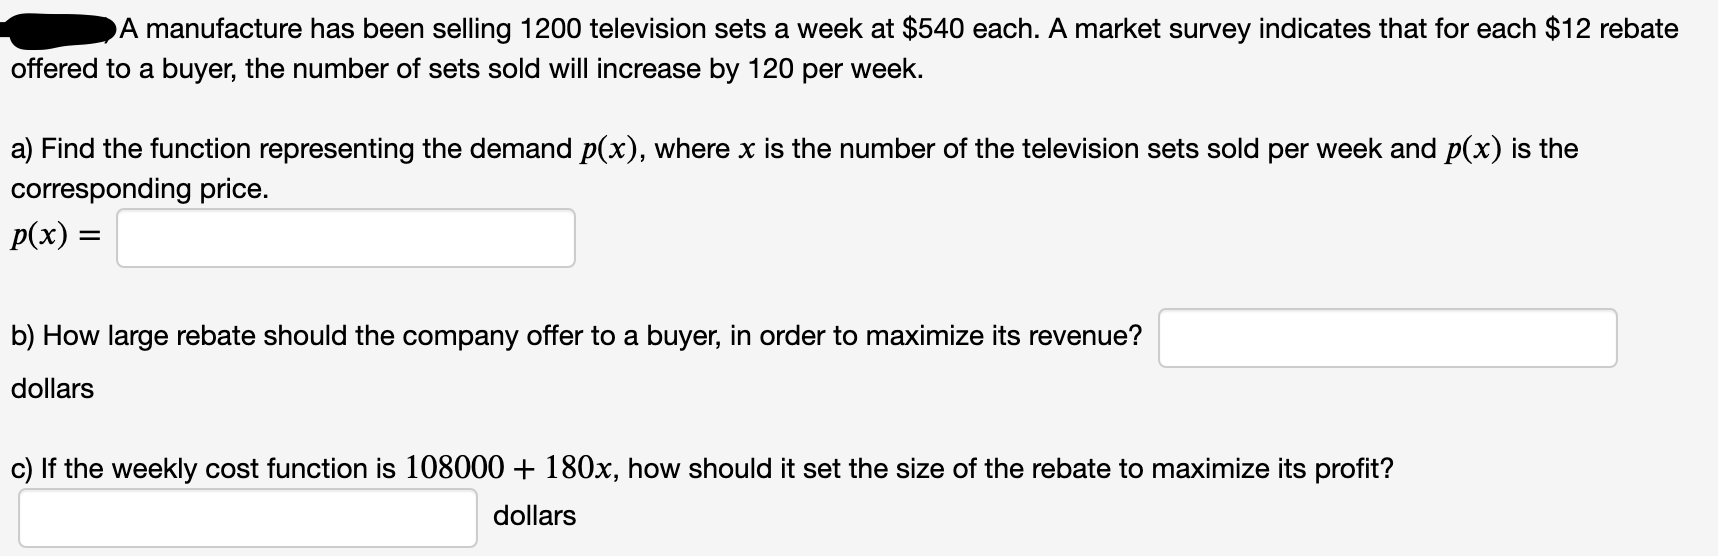 A manufacture has been selling 1200 television sets a week at $540 each. A market survey indicates that for each $12 rebate
offered to a buyer, the number of sets sold will increase by 120 per week.
a) Find the function representing the demand p(x), where x is the number of the television sets sold per week and p(x) is the
corresponding price.
p(x) =
b) How large rebate should the company offer to a buyer, in order to maximize its revenue?
dollars
c) If the weekly cost function is 108000 + 180x, how should it set the size of the rebate to maximize its profit?
dollars
